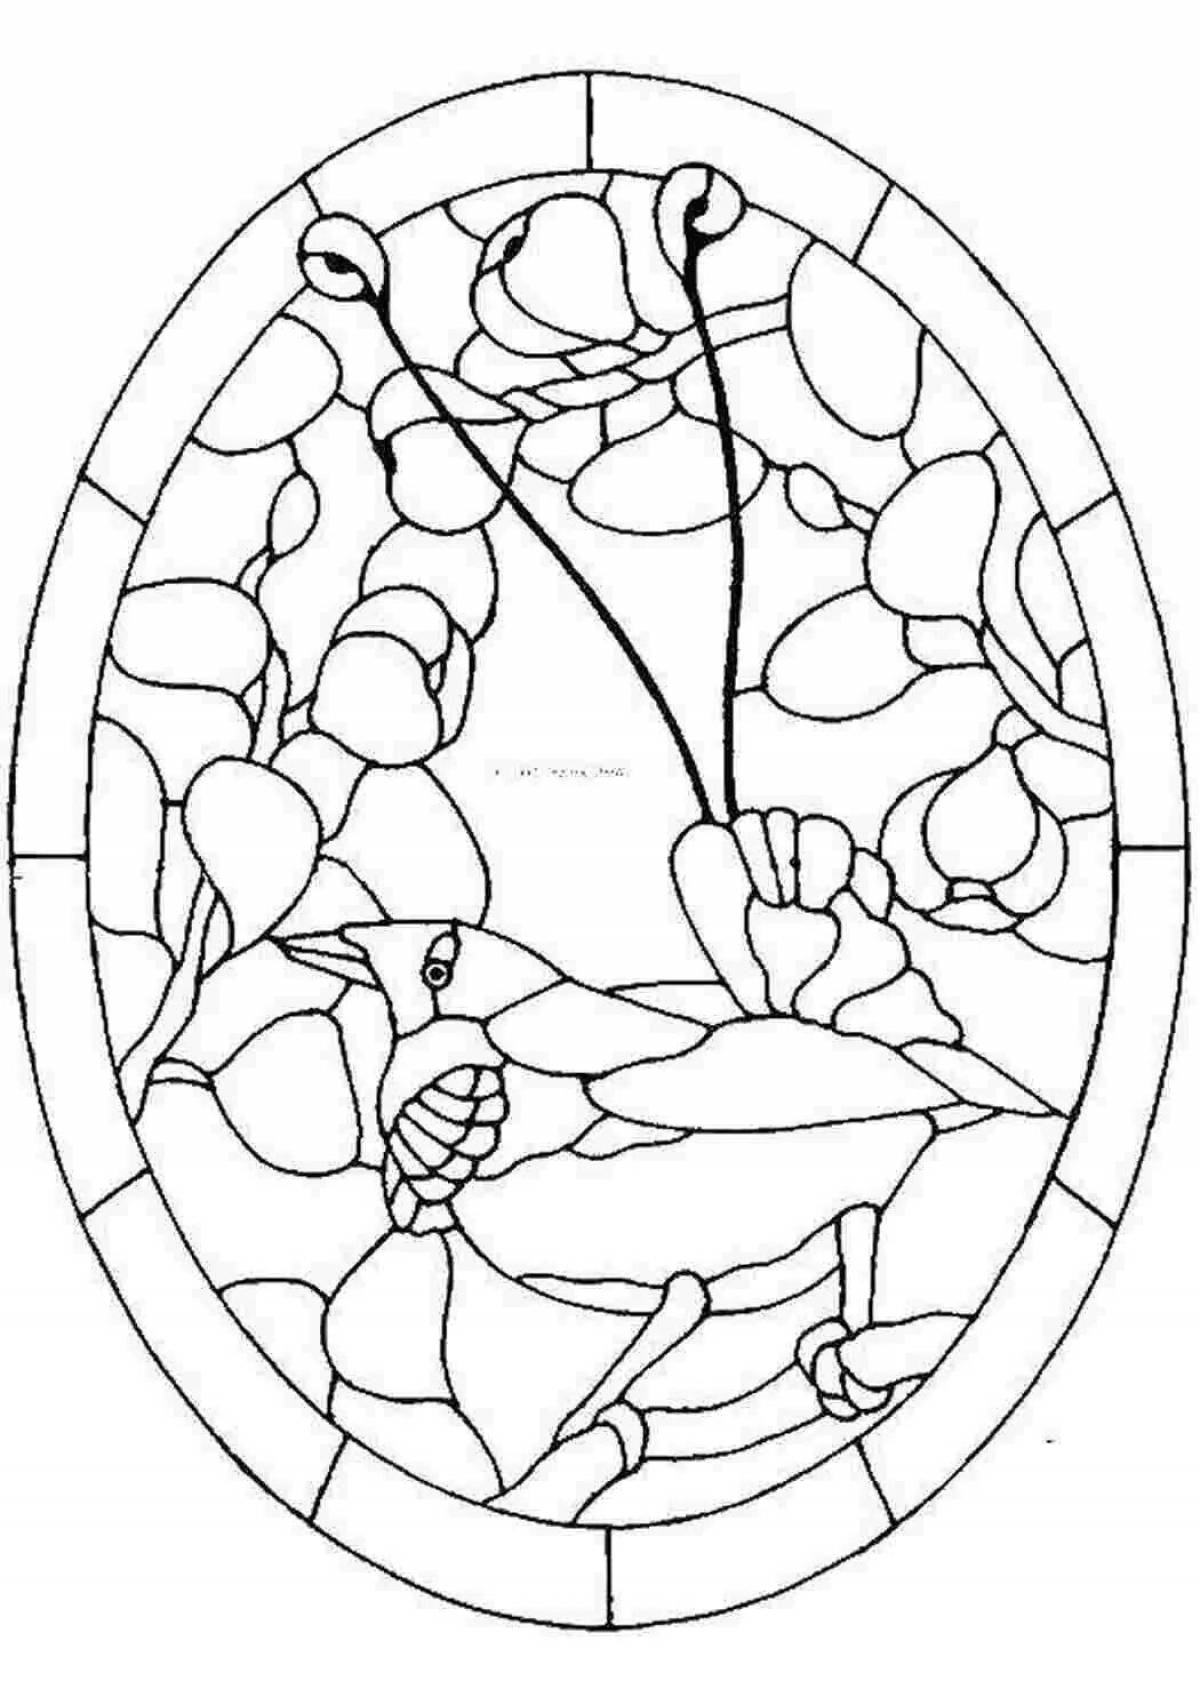 Fantastic stained glass coloring book for kids